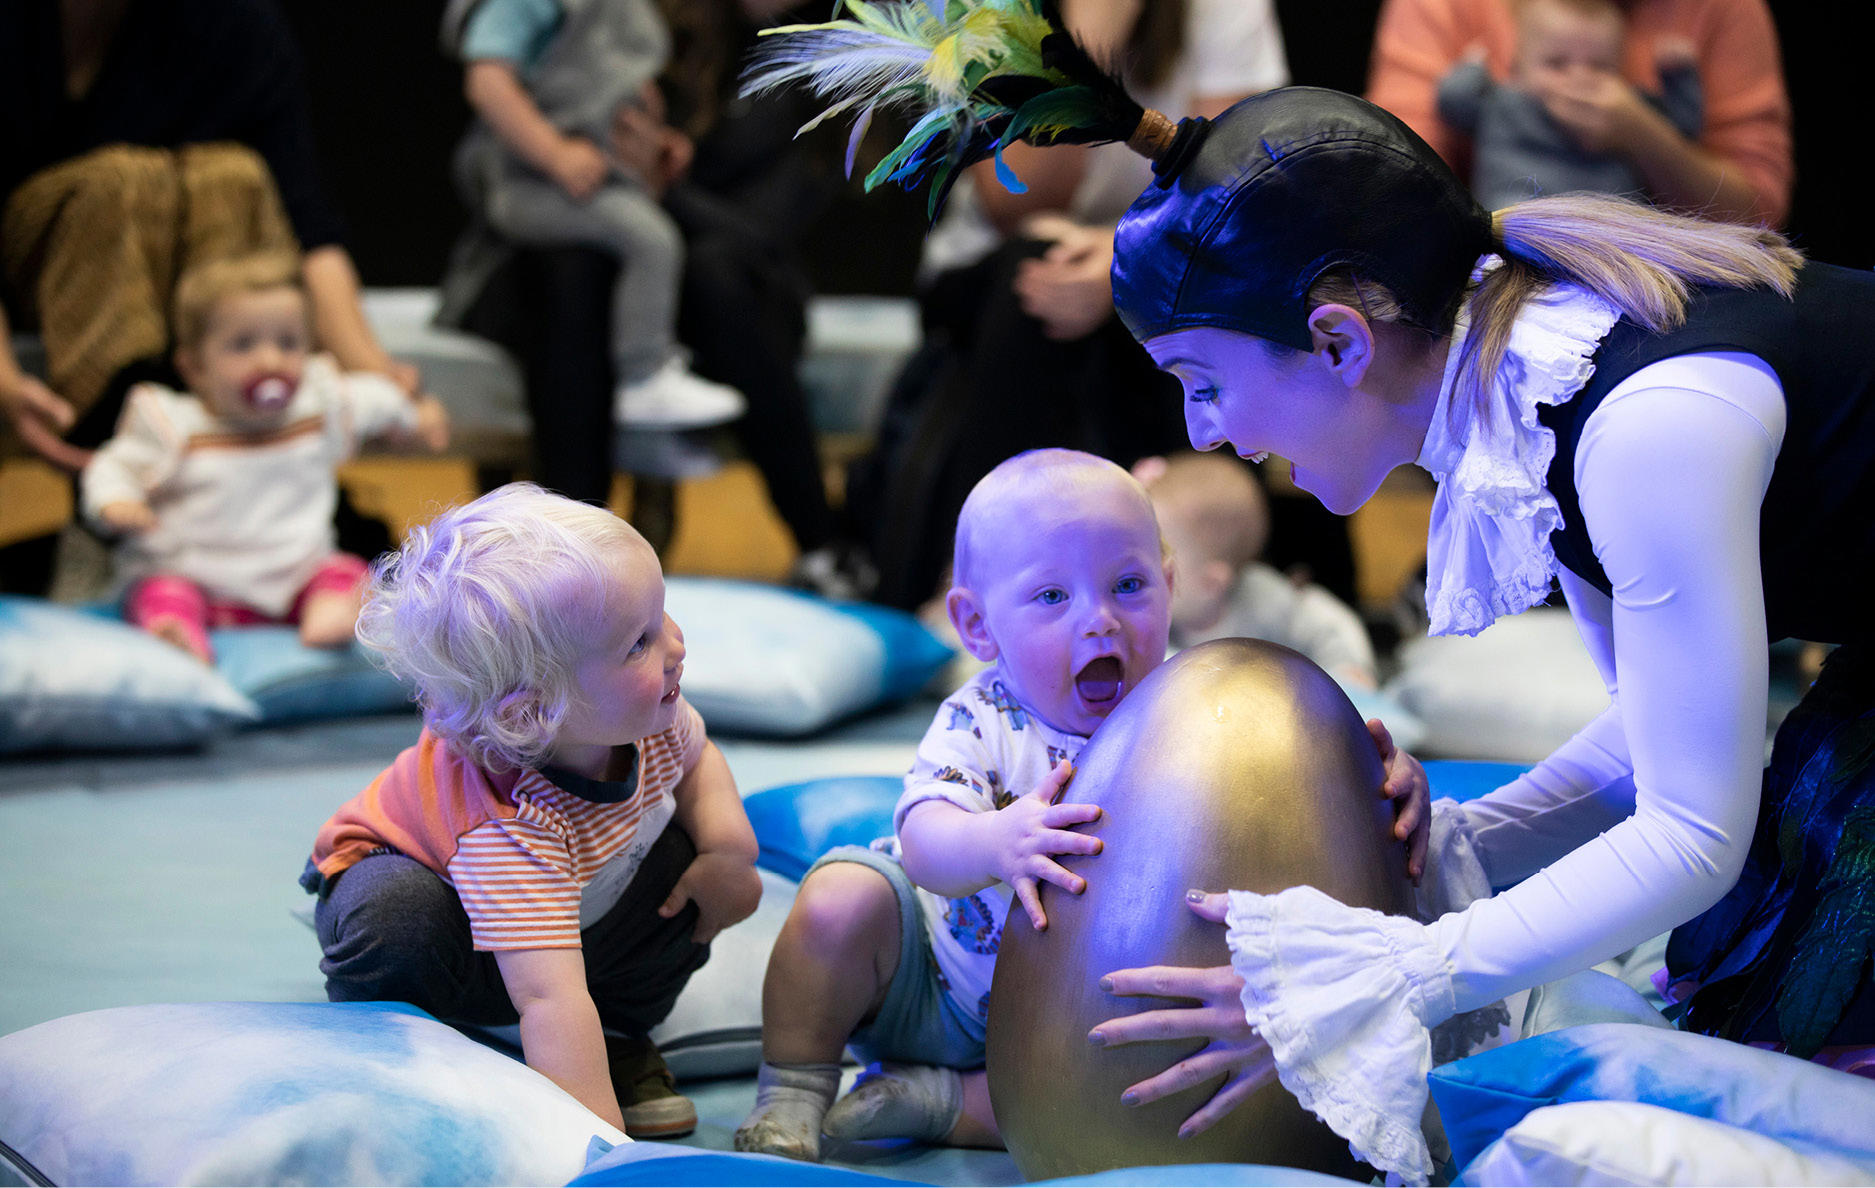 A performance of BambinO. A woman holds a large golden egg, wearing a head dress with plumes of feathers sticking out the top. A small child also holds the egg, while another toddler gazes up at the woman.